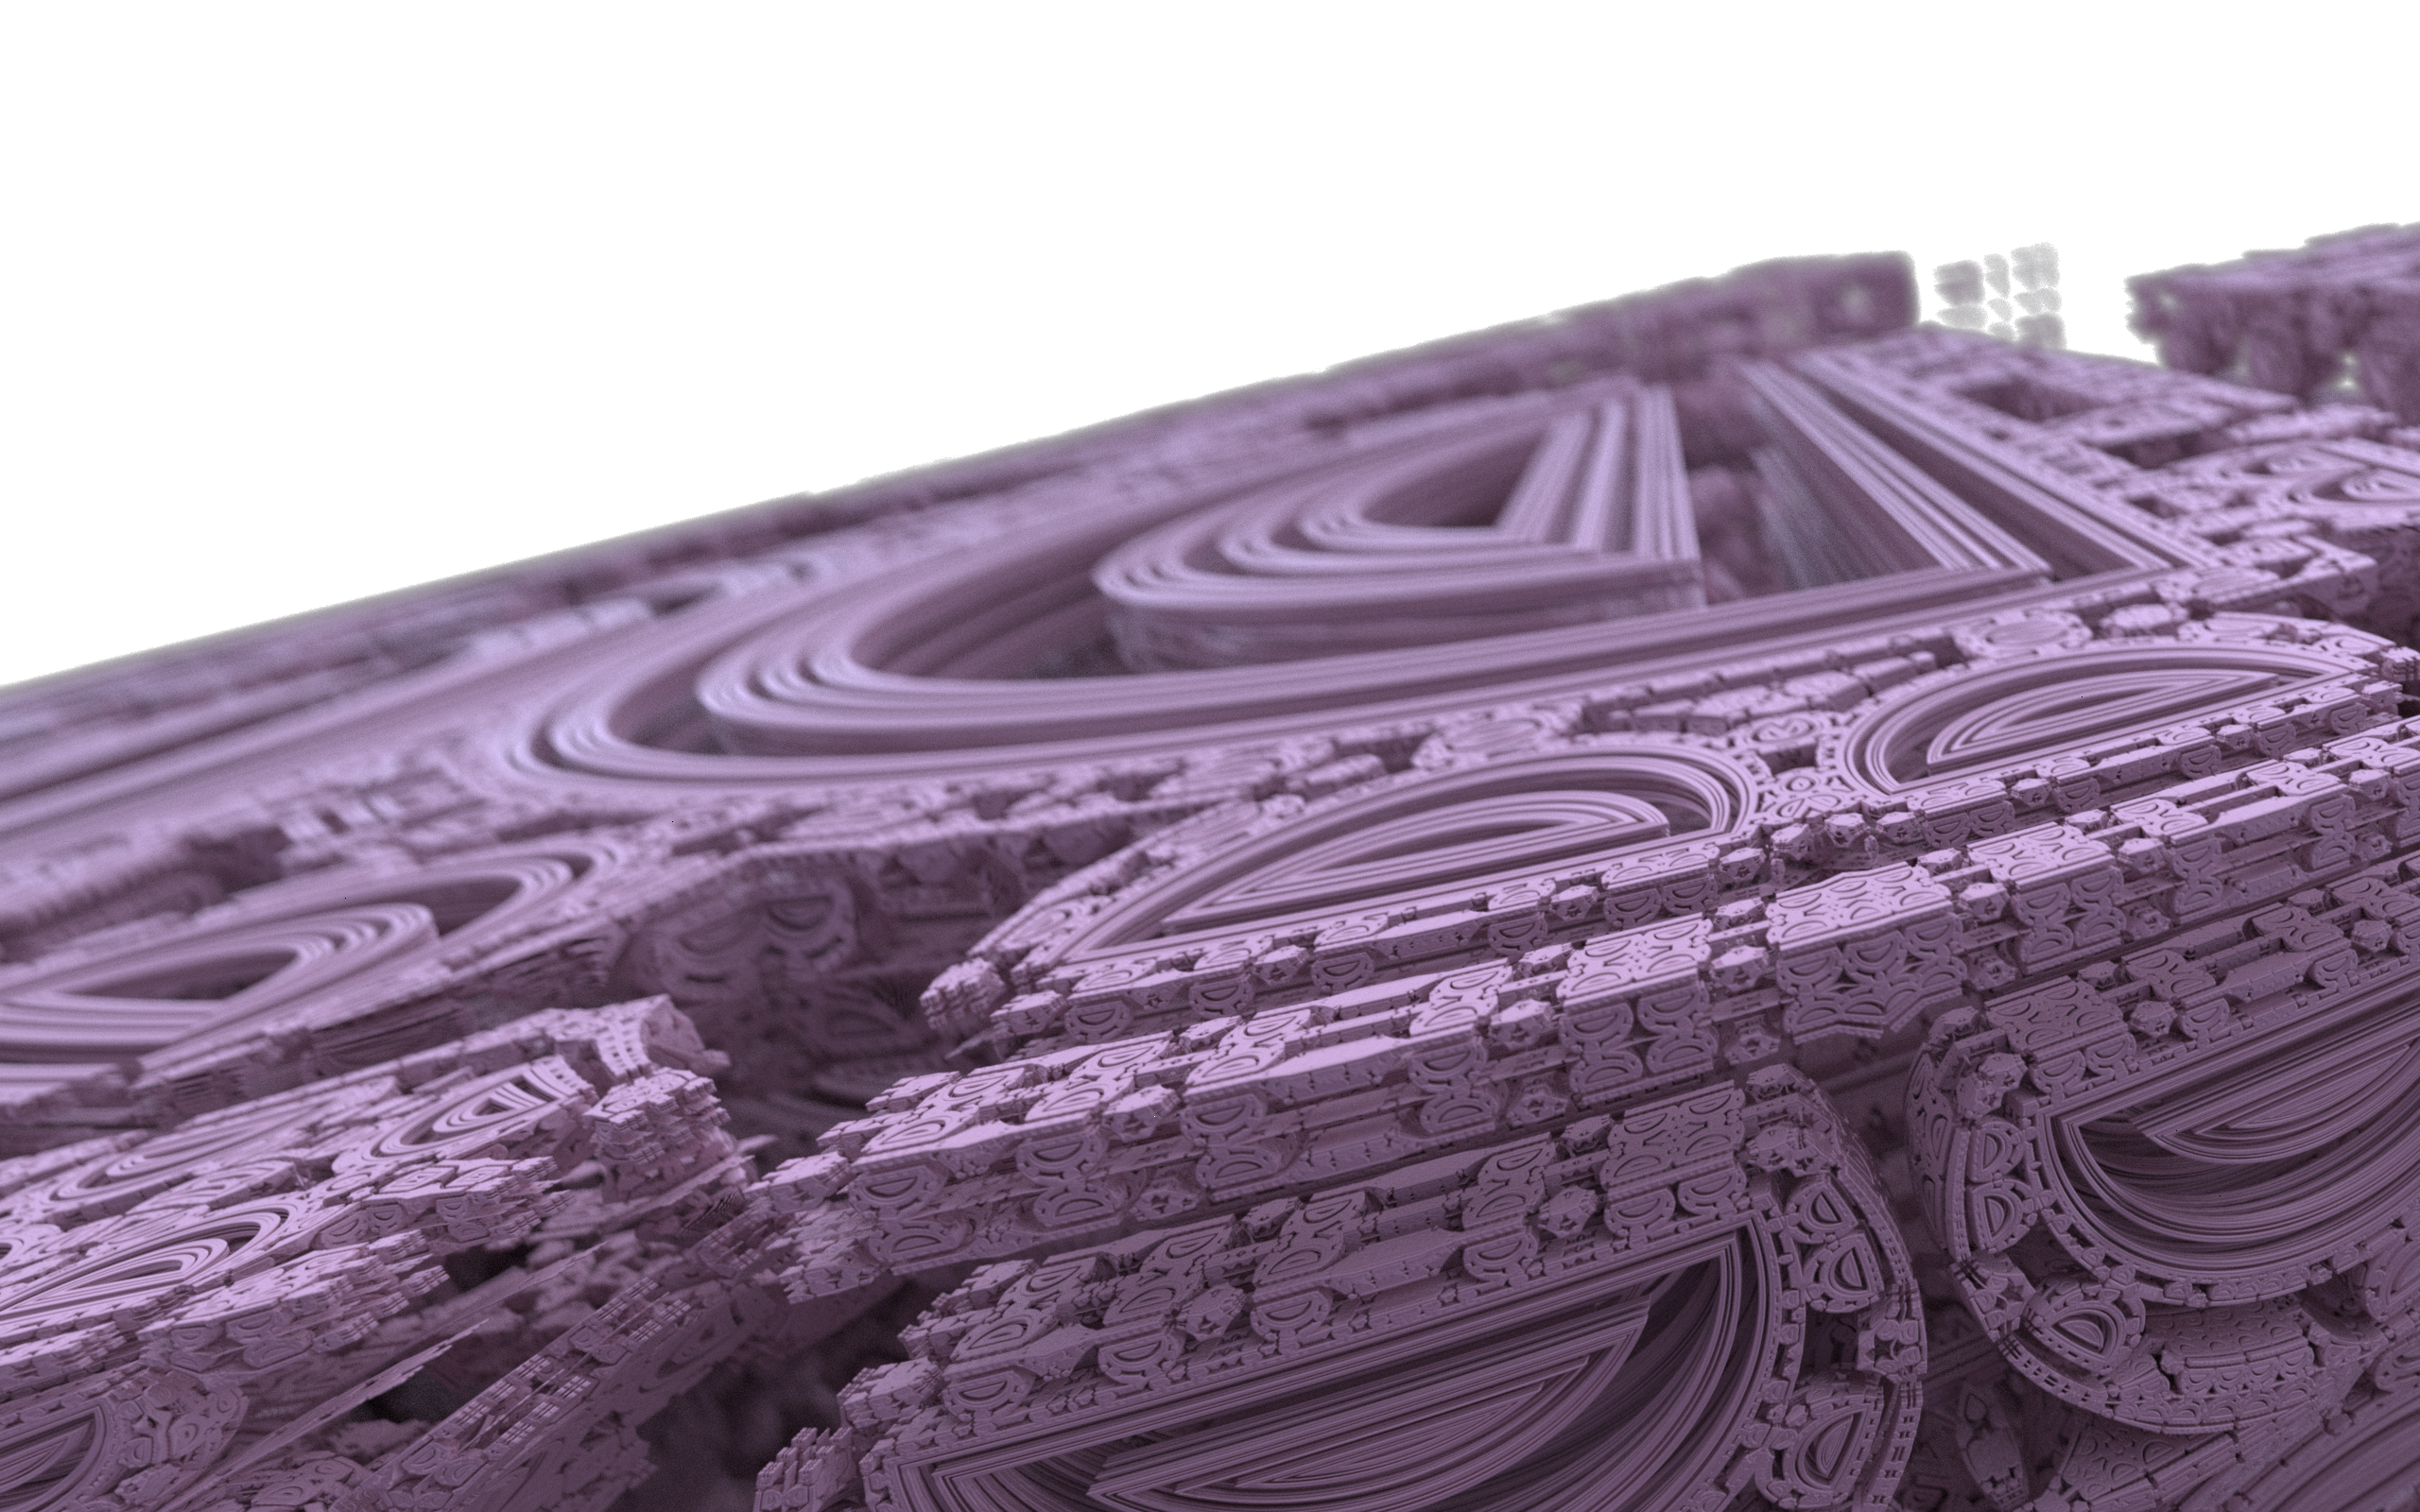 Rayn output example - this renderer uses ultraviolet for its math